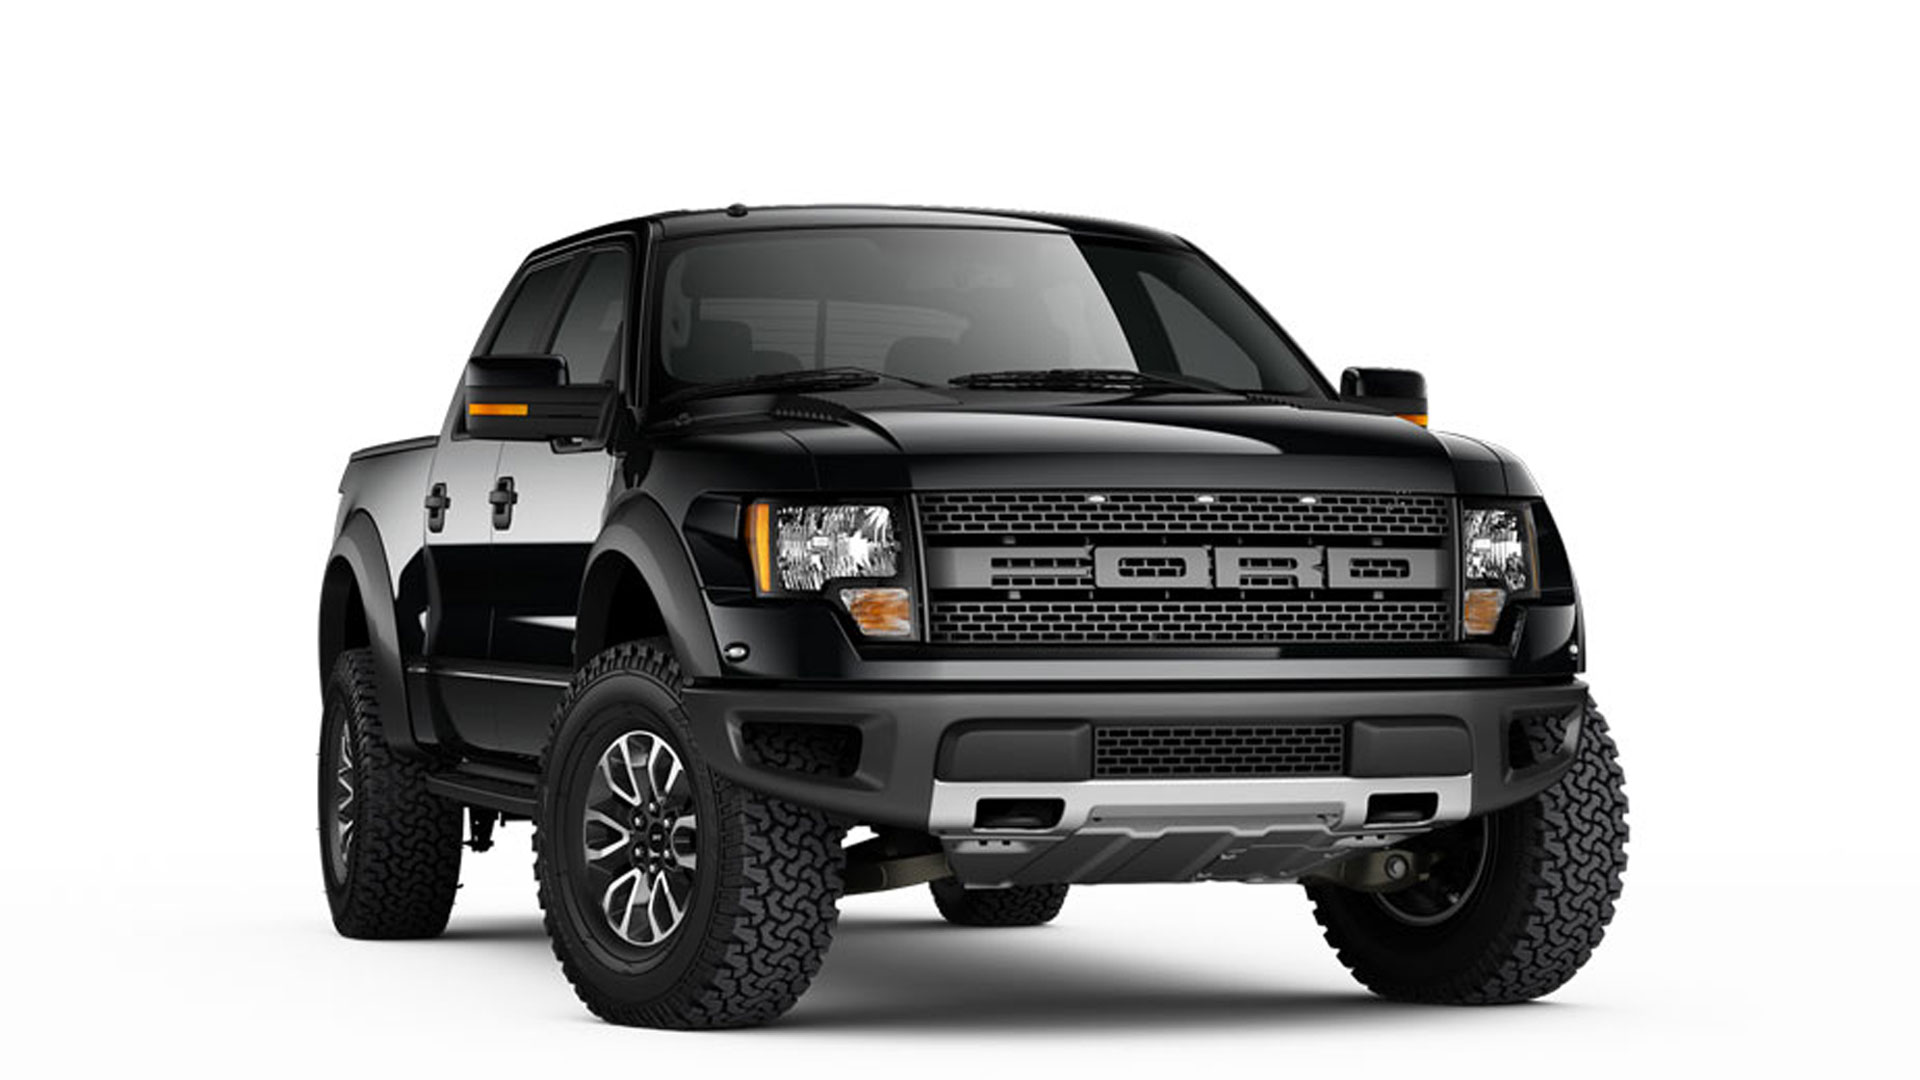 Win a Ford Raptor - Epic Shift Project - Charity Raffle